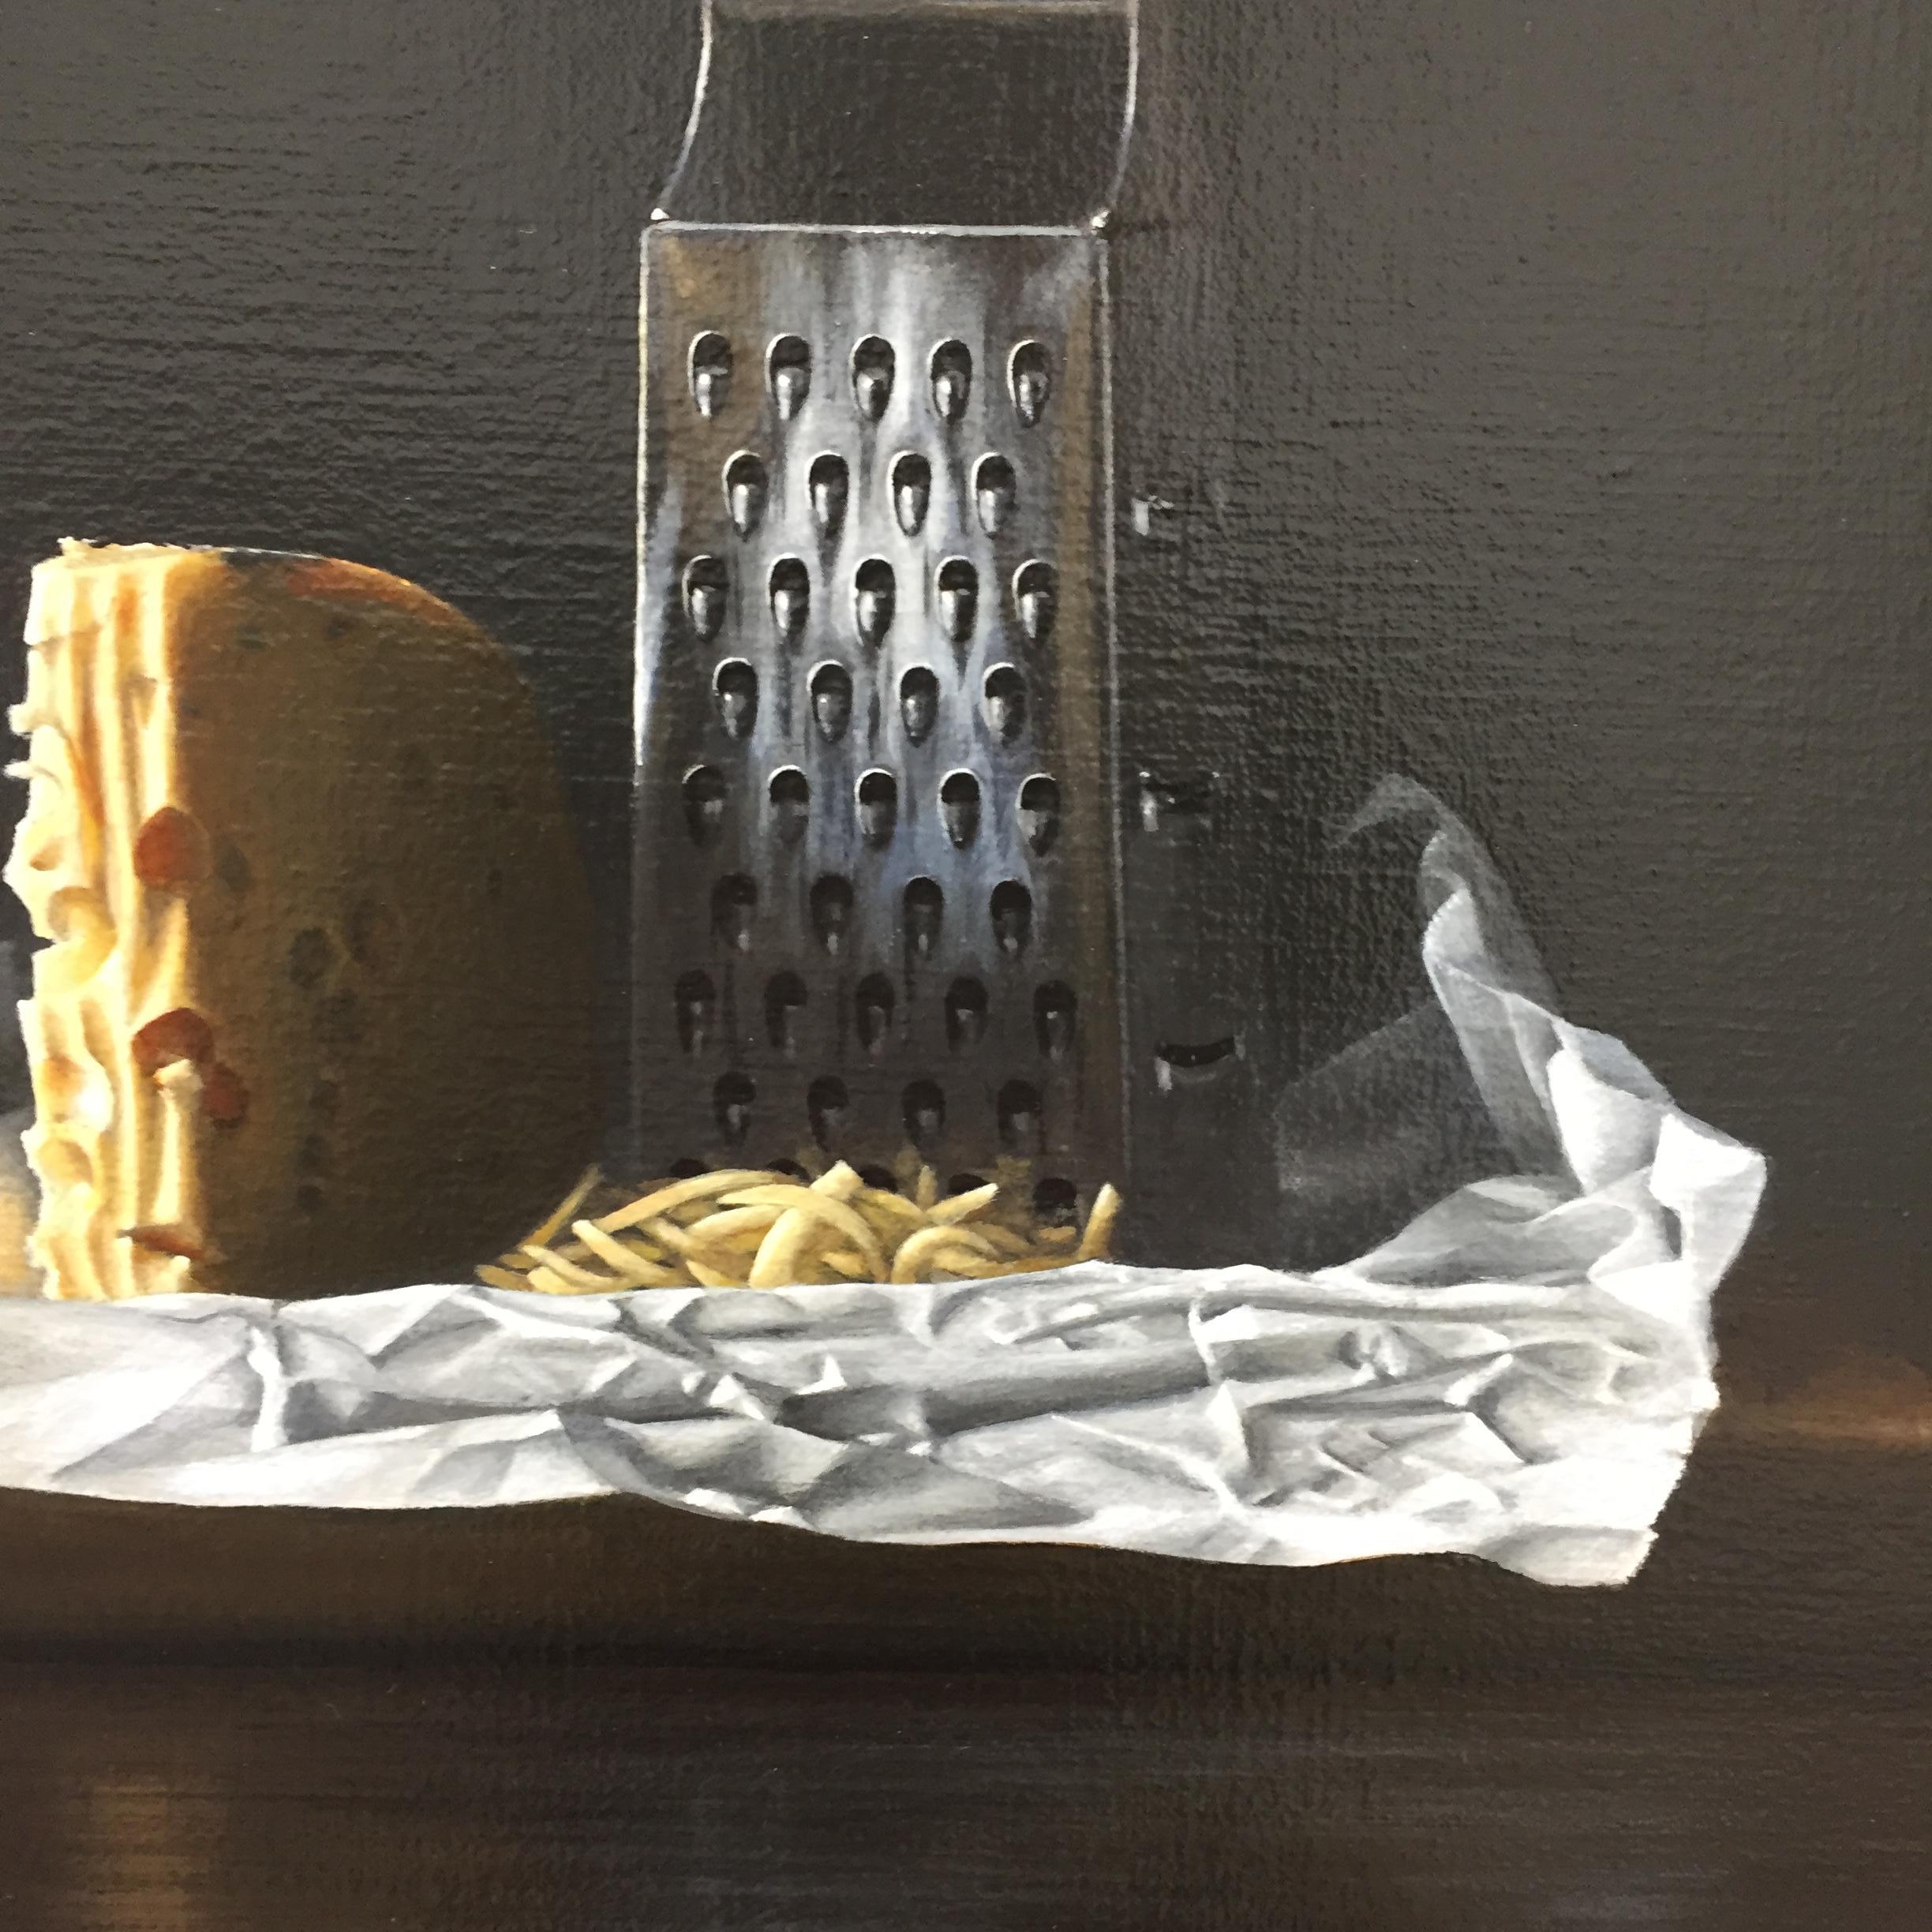 Grated Cheese- 21st Century Contemporary Still-life Painting by Heidi von Faber 4